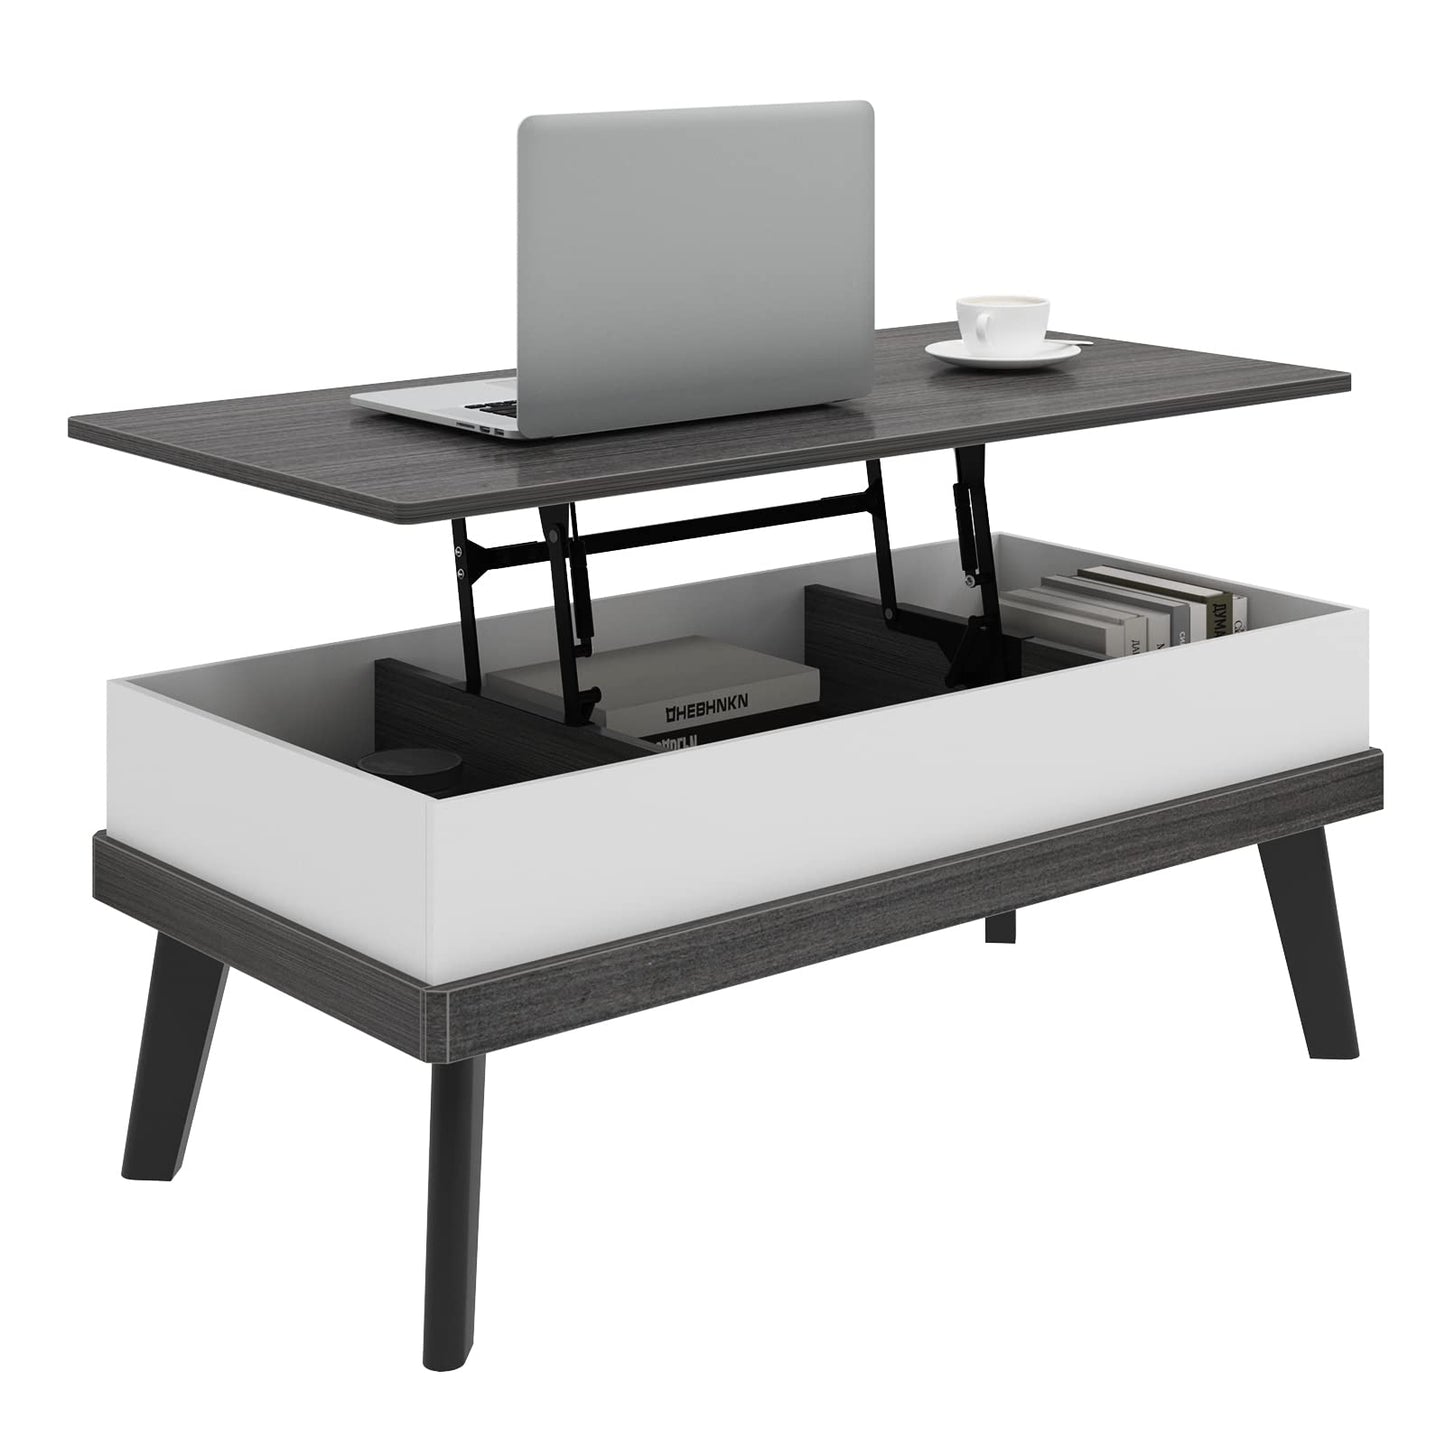 SogesHome Lift Top Coffee Table, Tea Table with Hidden Compartment, Lift Tabletop Table for Living Room, Home Office, Kitchen, Grey&White